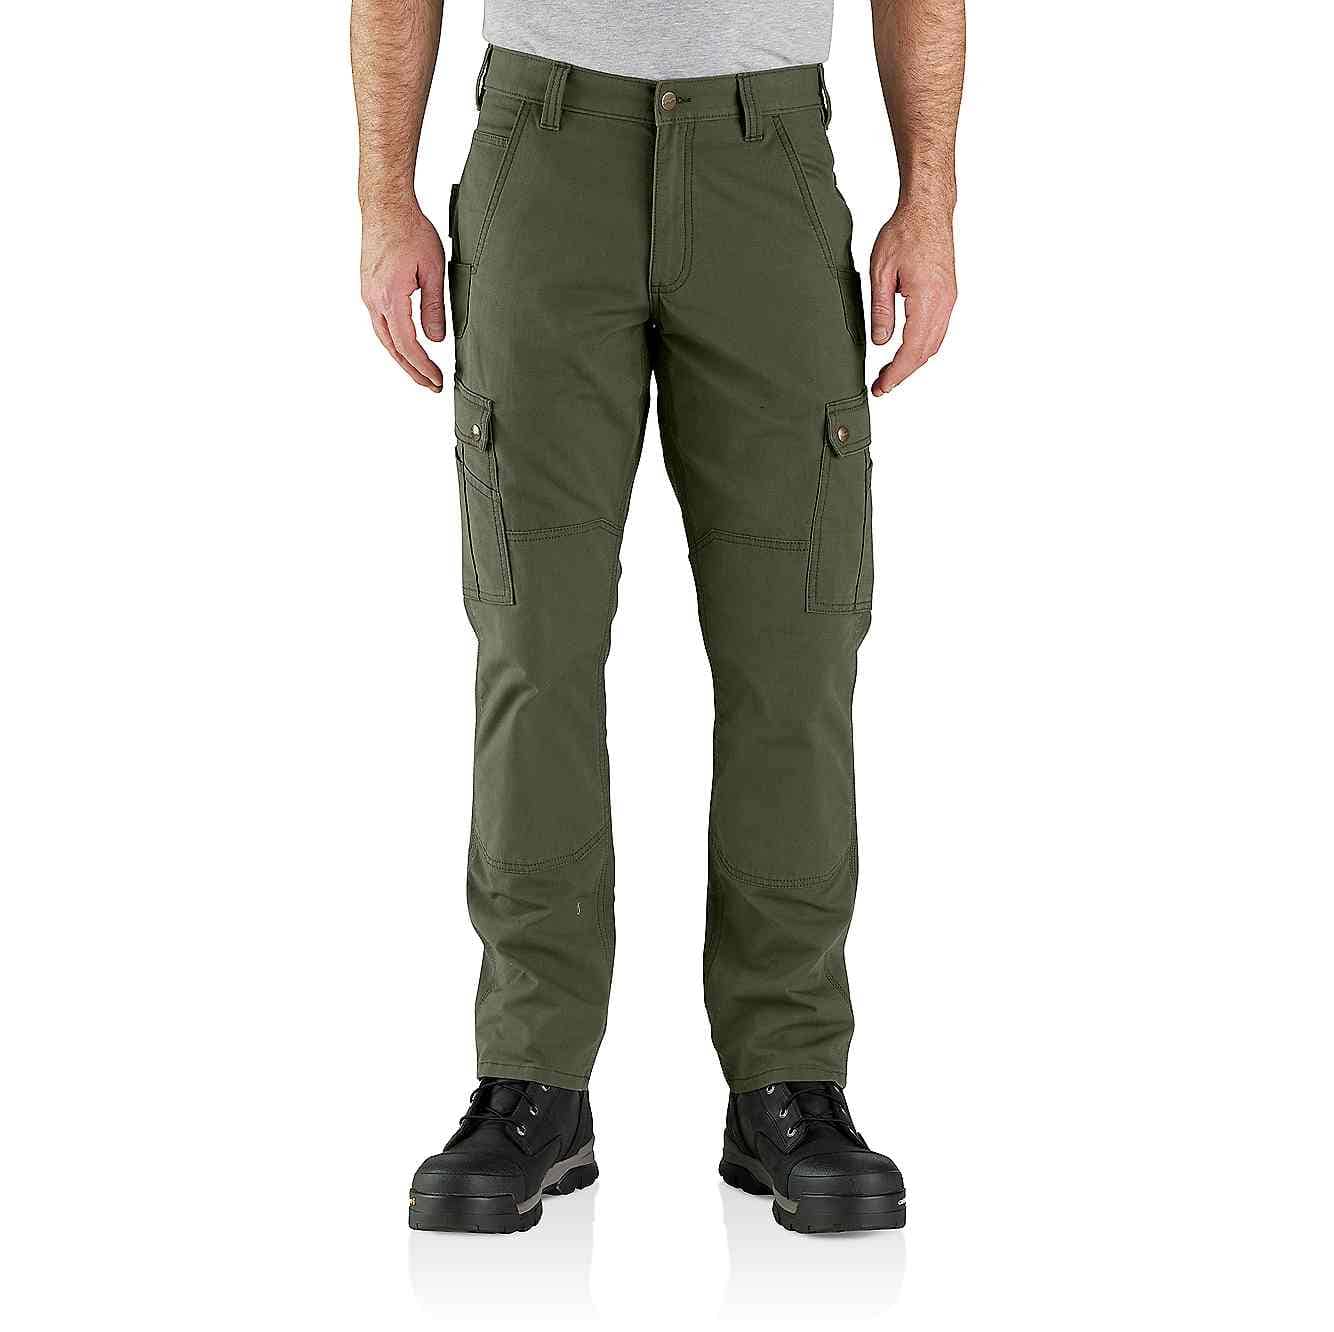 RUGGED FLEX RELAXED FIT RIPSTOP CARGO WORK PANT | Carhartt®